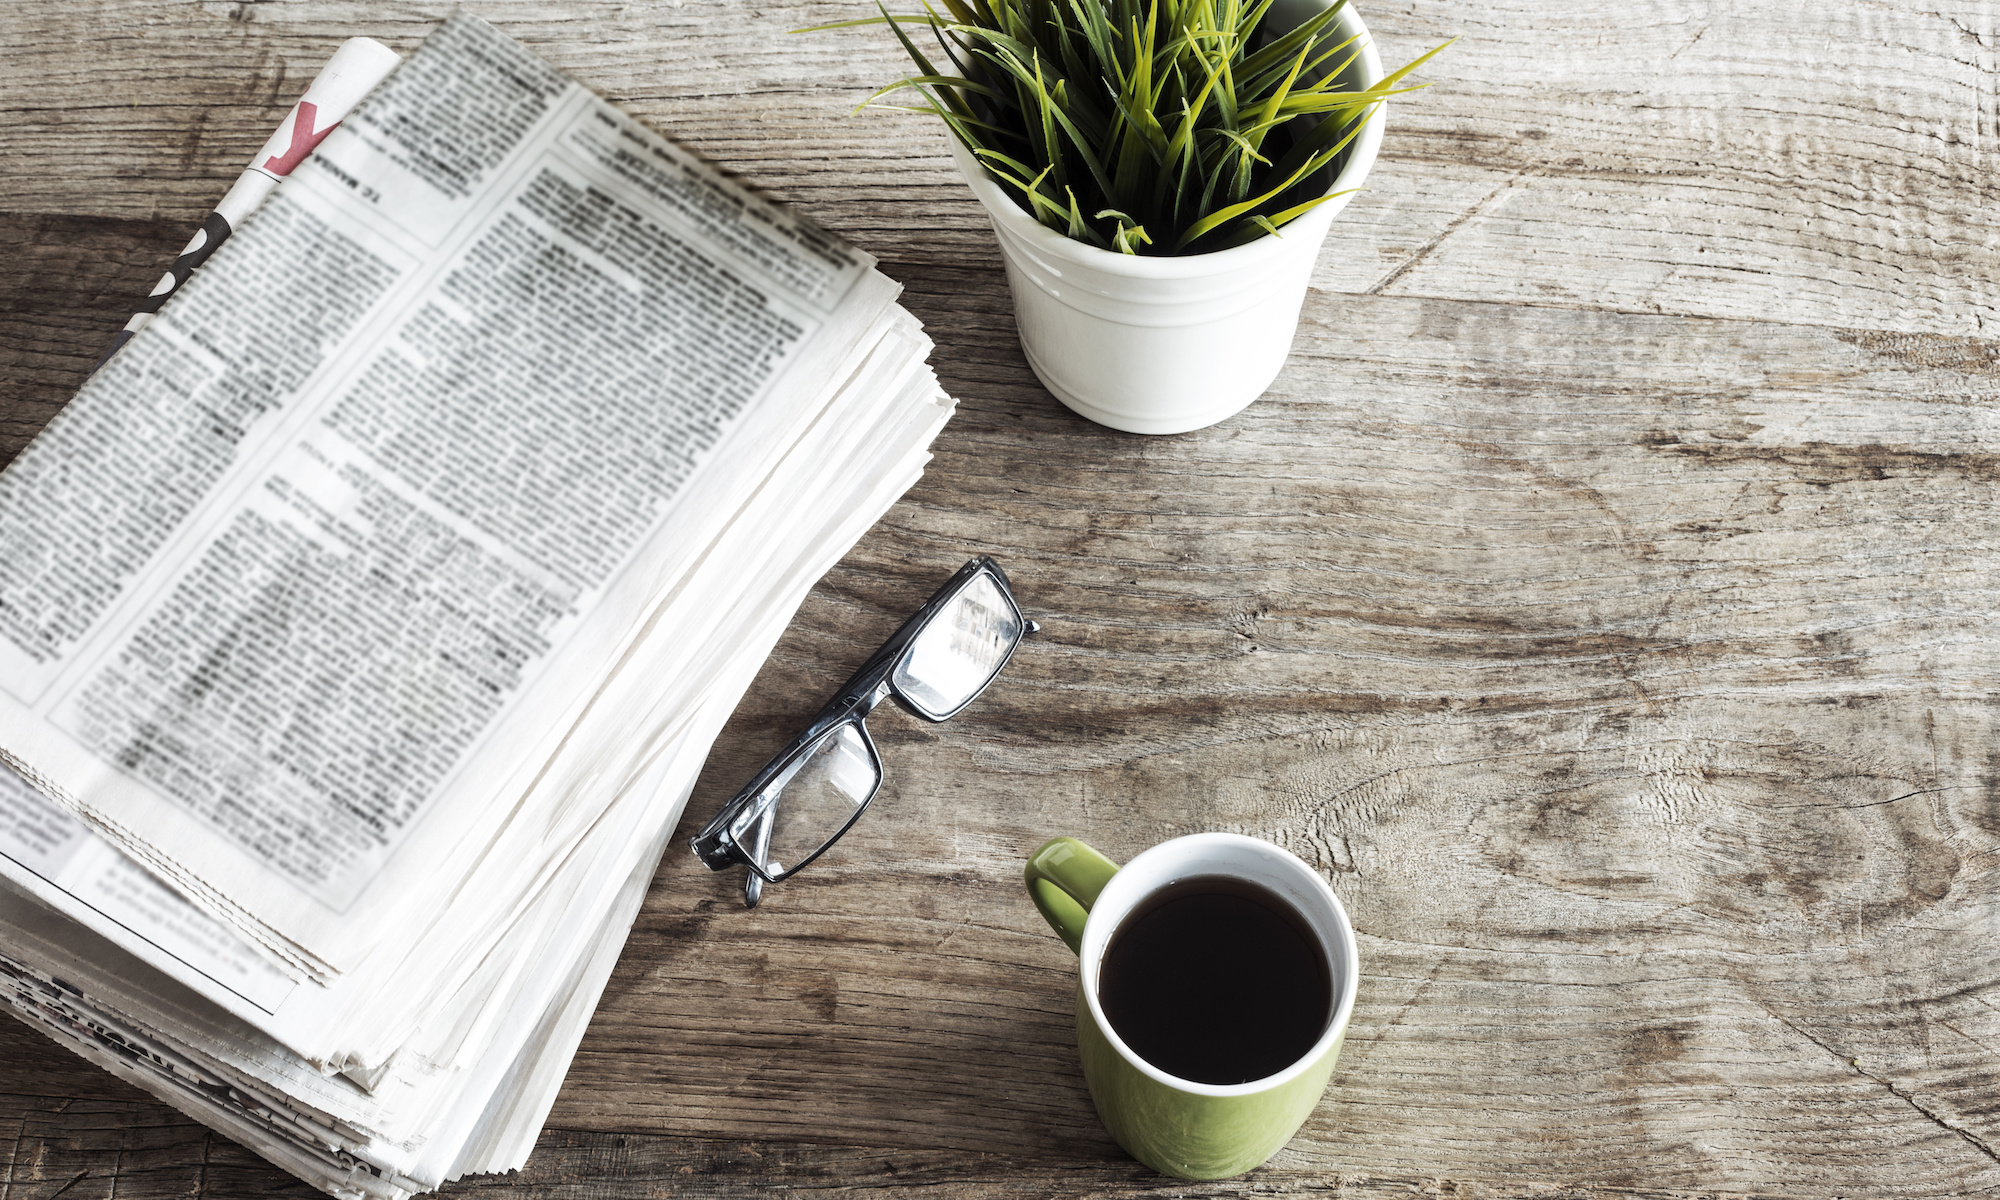 newspaper, plant, reading glasses, and coffee on wooden table